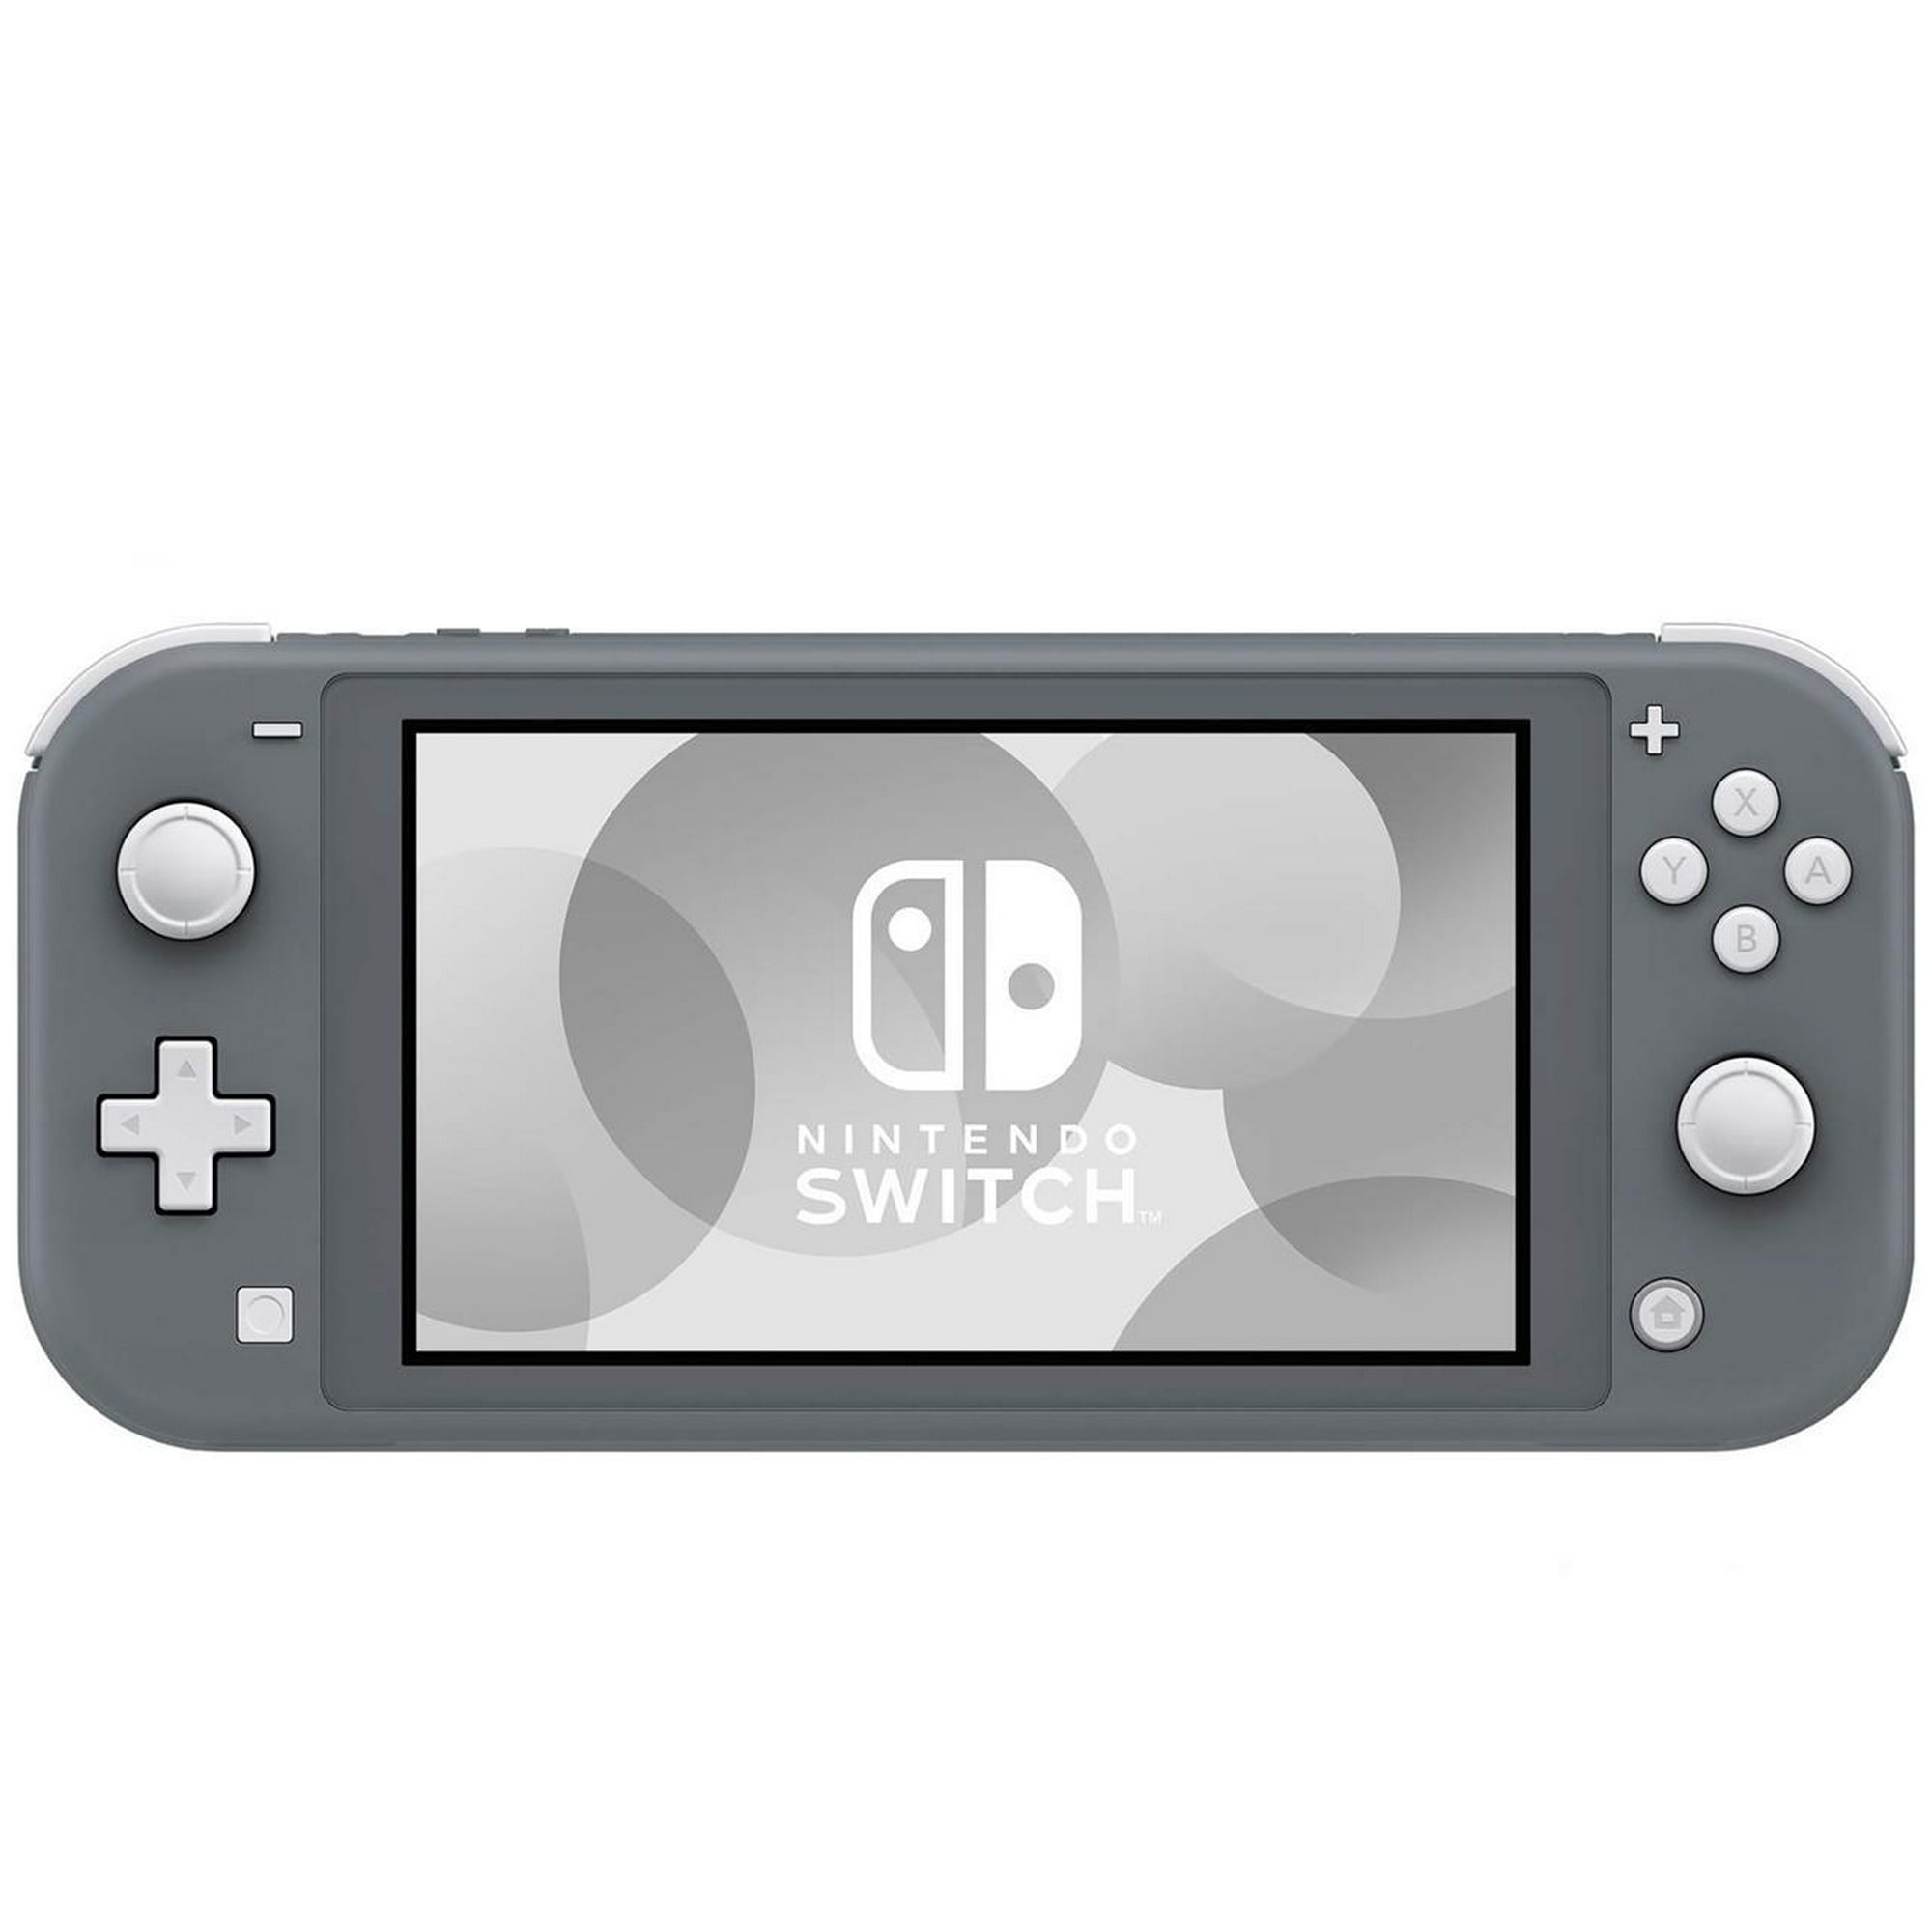 Nintendo Switch Lite (Gray) Bundle with Mario Kart 8 and Cleaning